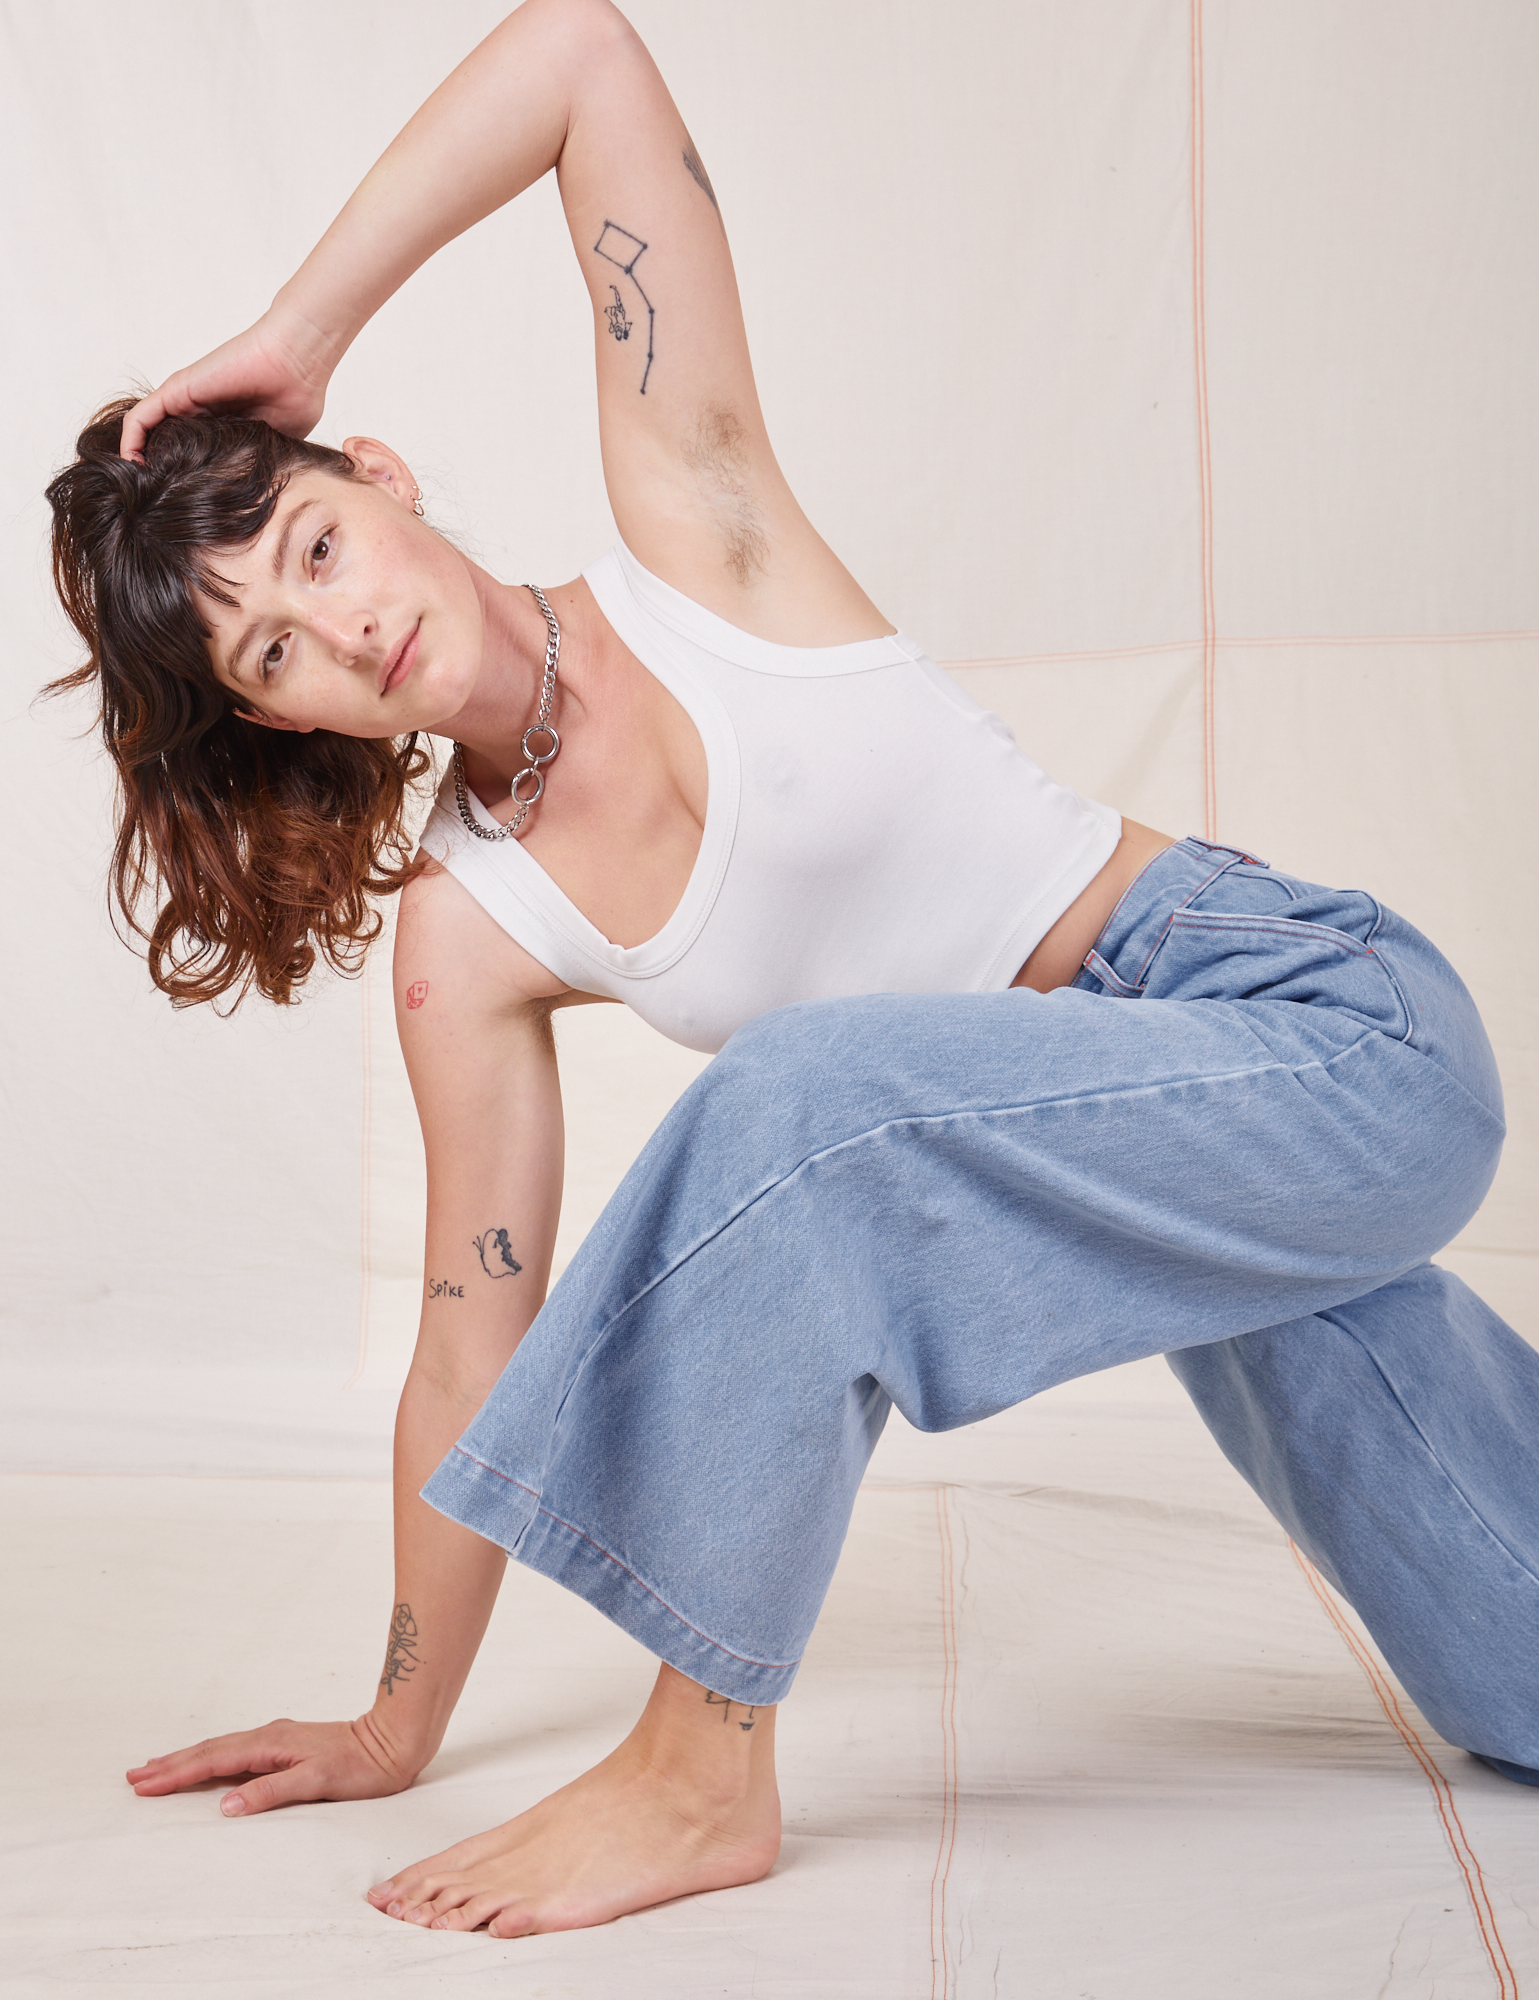 Alex is wearing Indigo Wide Leg Trousers in Light Wash and vintage off-white Cropped Tank Top